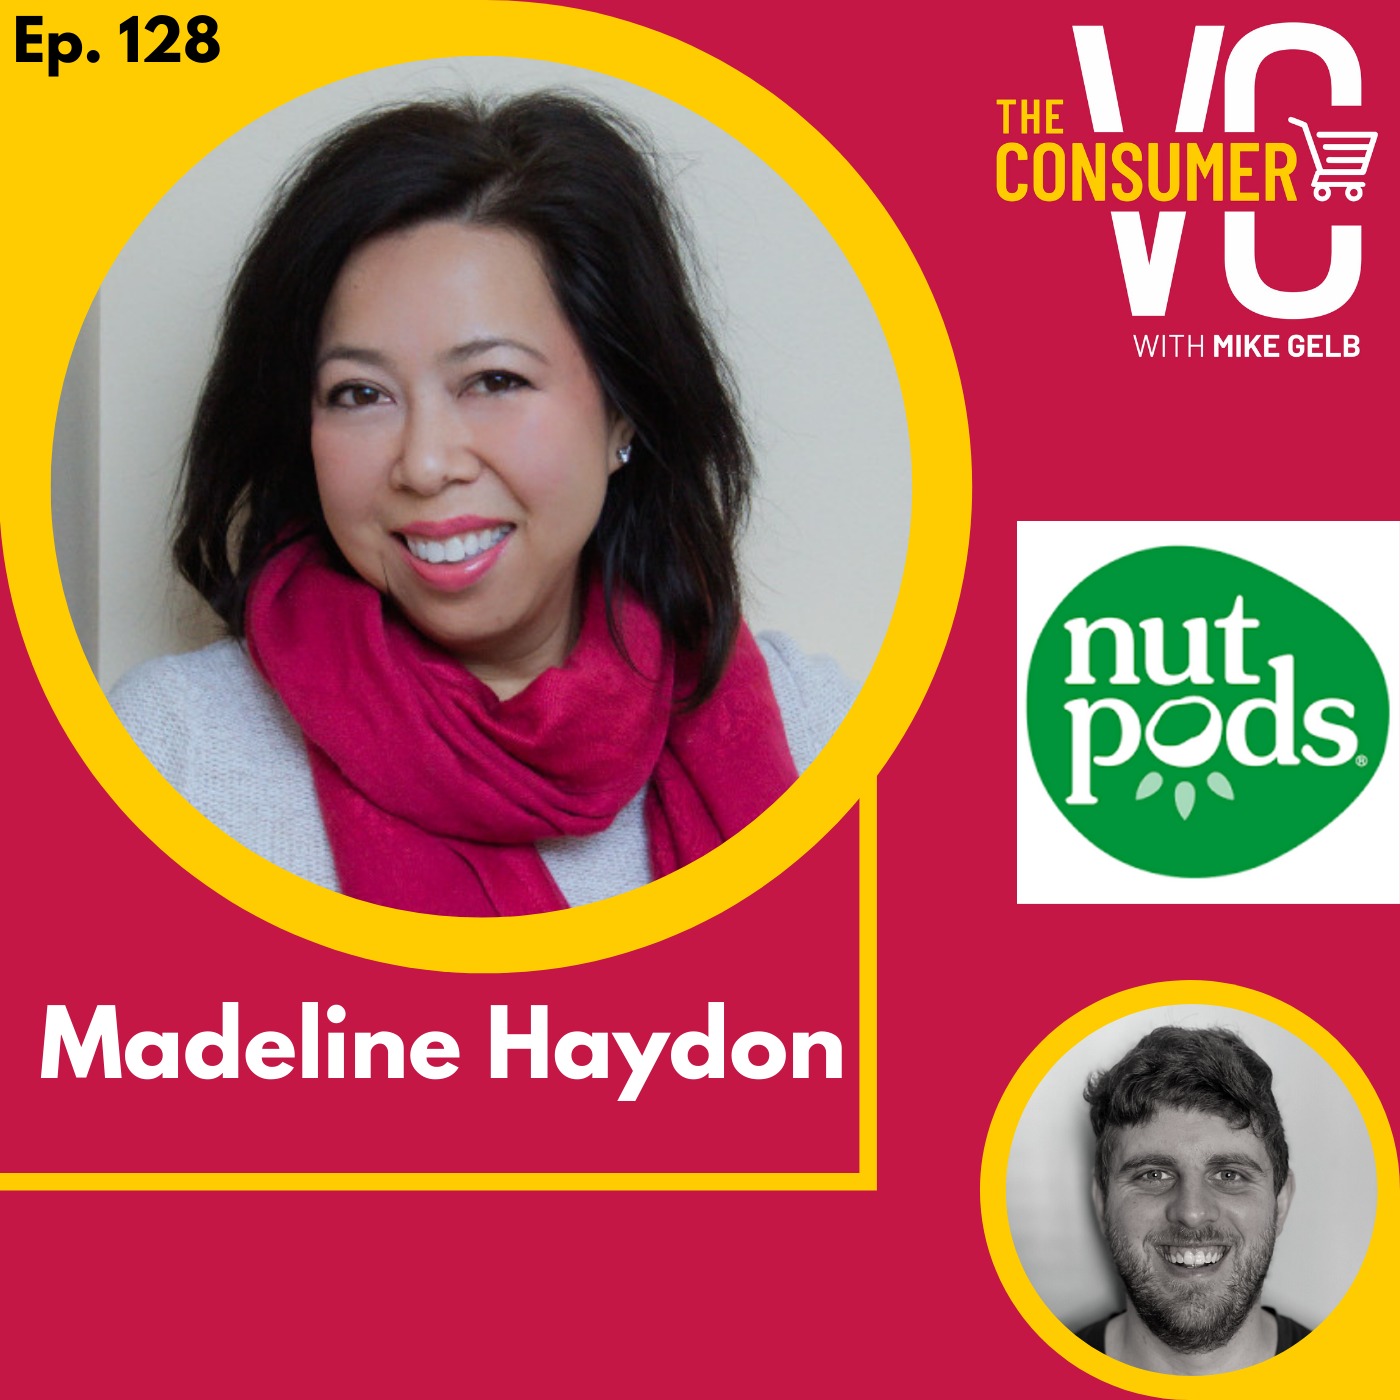 Madeline Haydon (nutpods) - Developing creamers from scratch with no food and bev experience, using Amazon as a testing ground, and fundraising without a network